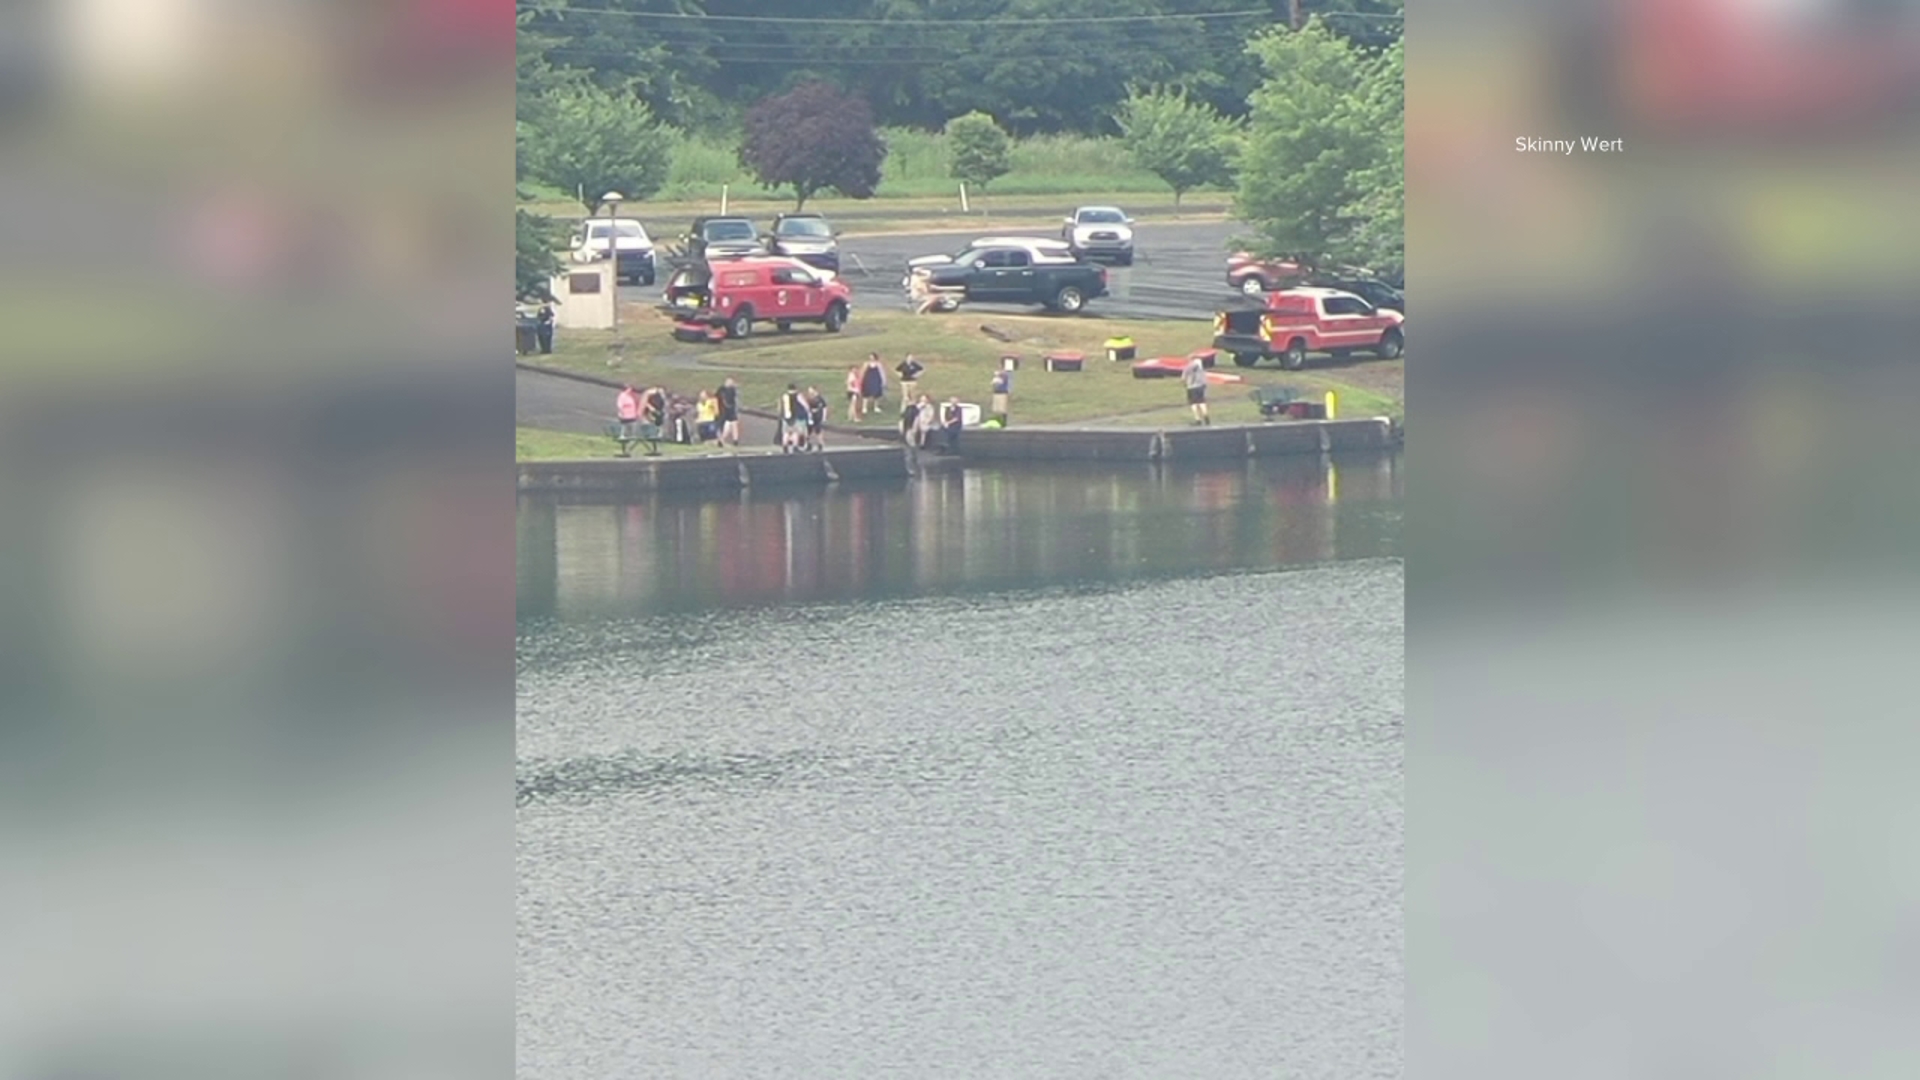 Crews responded to part of the Susquehanna River in Lock Haven Saturday afternoon for a water rescue.